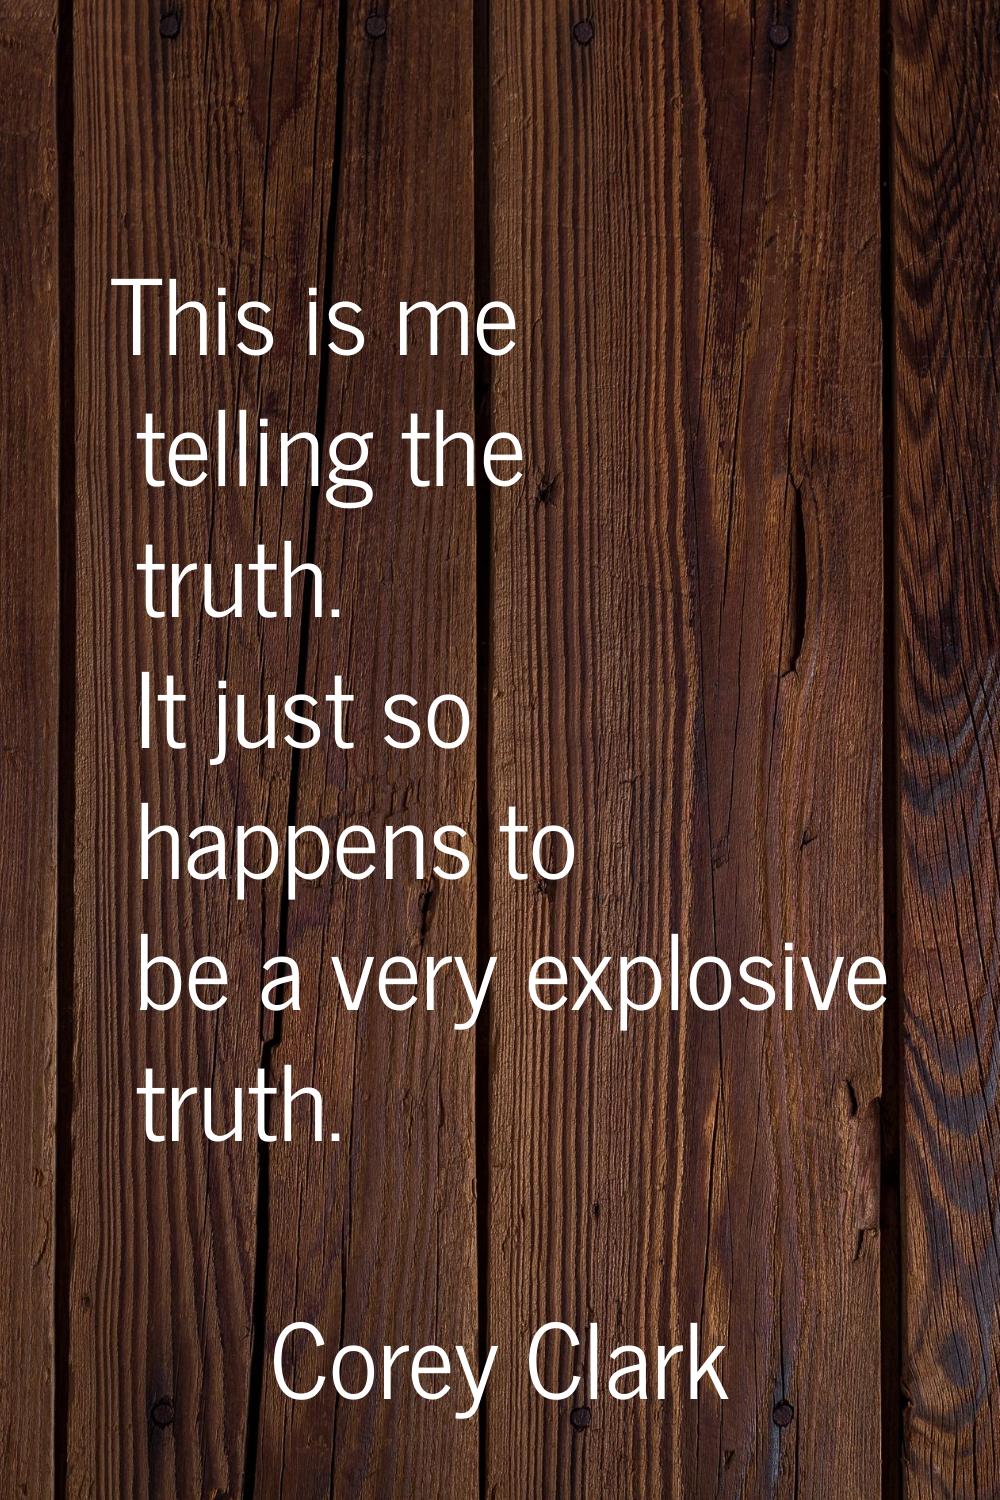 This is me telling the truth. It just so happens to be a very explosive truth.